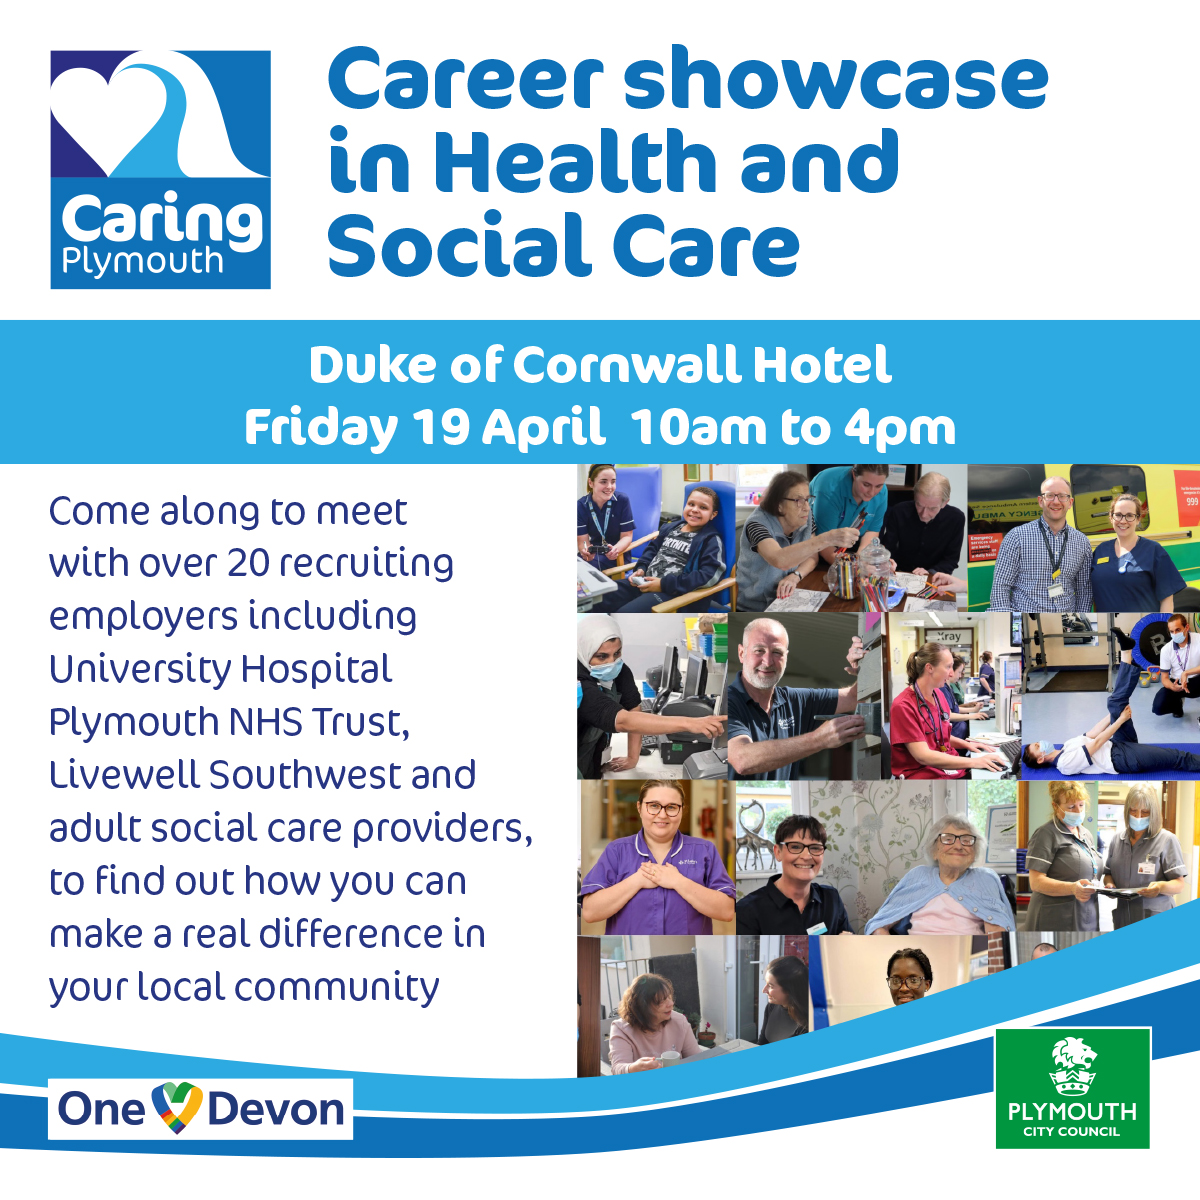 Come to the Careers Showcase in Health and Social Care at the Duke of Cornwall Hotel on 19 April, 10am to 4pm and find out about a career in health and social care. Register here: ow.ly/J8yf50R4fxq @livewellsw @CaringPlymouth @plymouthcc @TheDukePlymouth